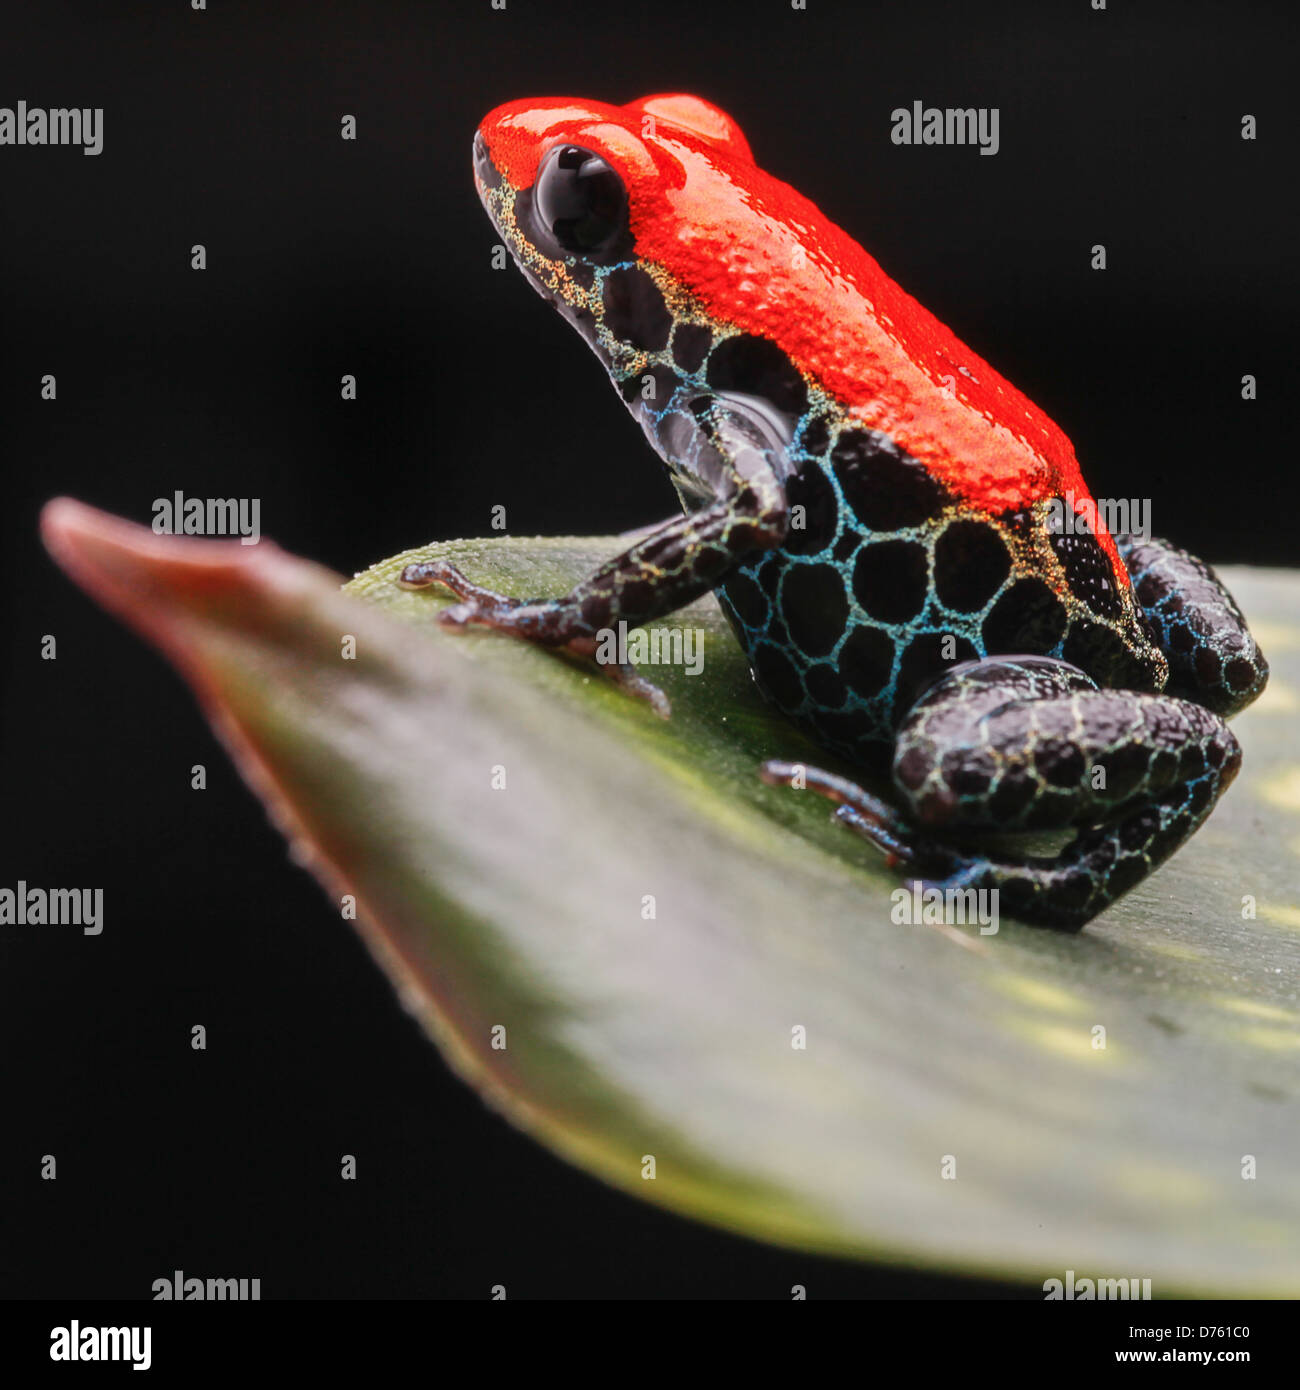 reticulated poison dart frog Ranitomeya raticulata from tha Amazon rain forest in Peru near Iquitos Stock Photo